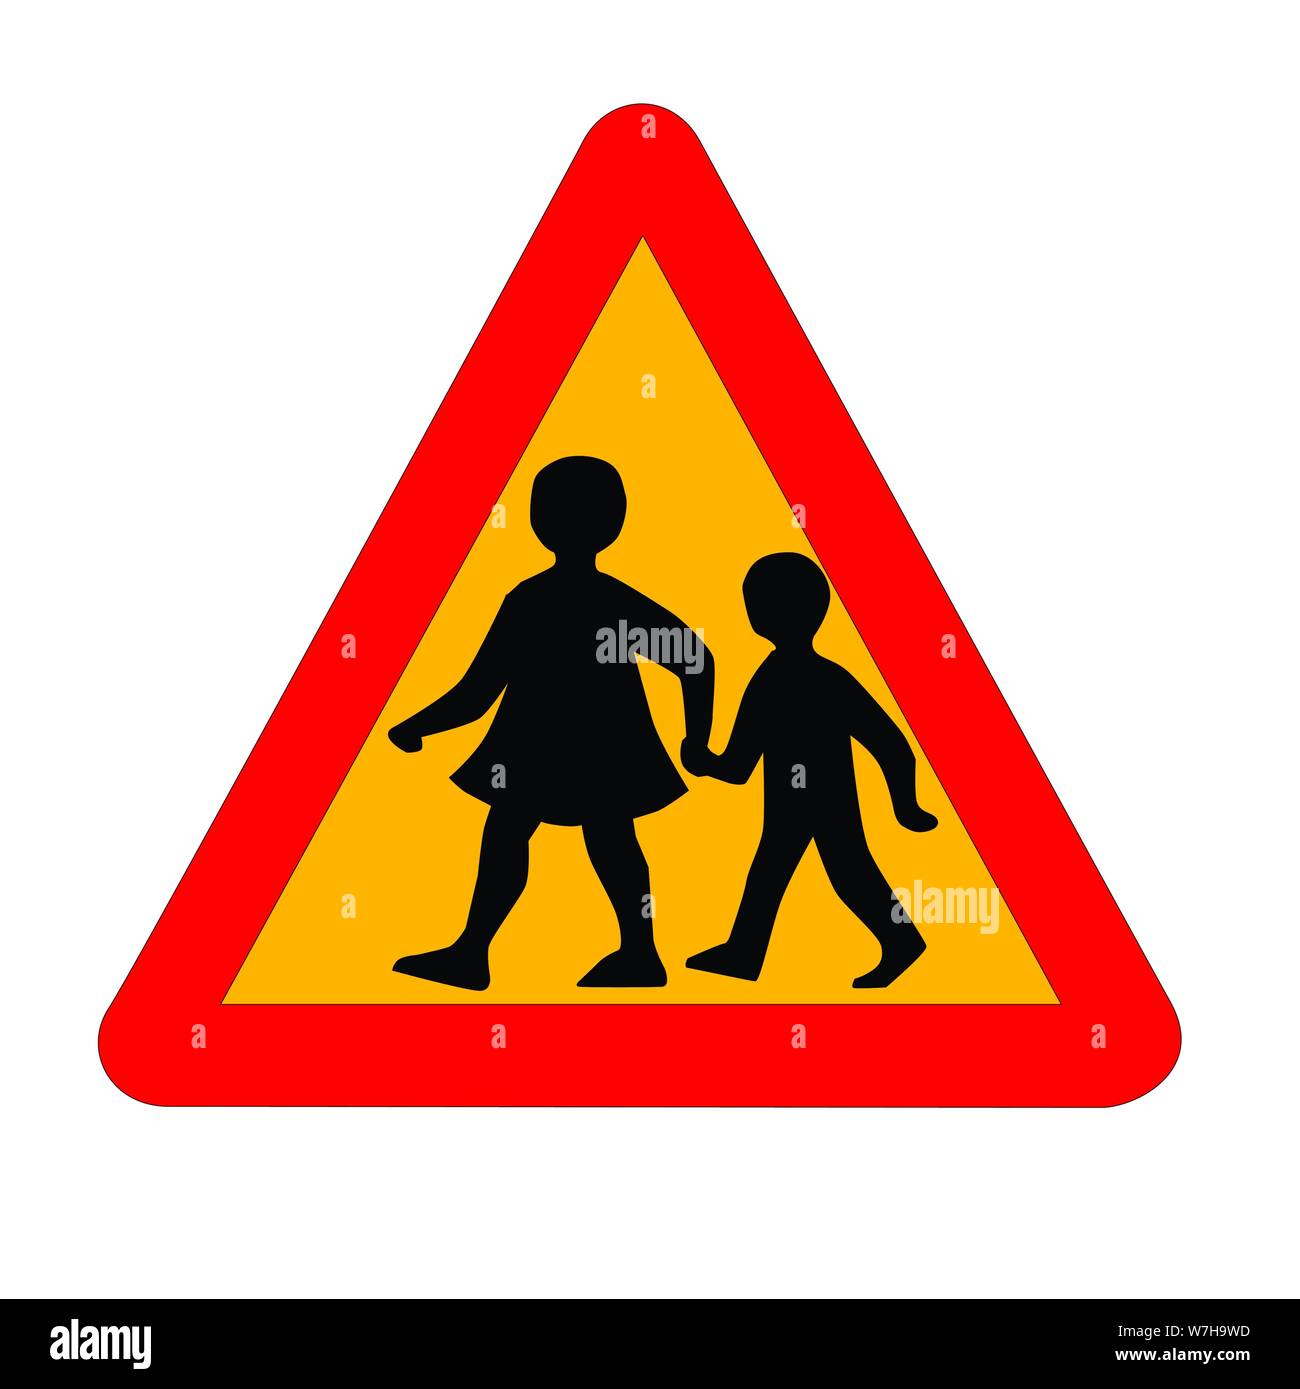 Children Crossing Road sign on white background Stock Photo - Alamy